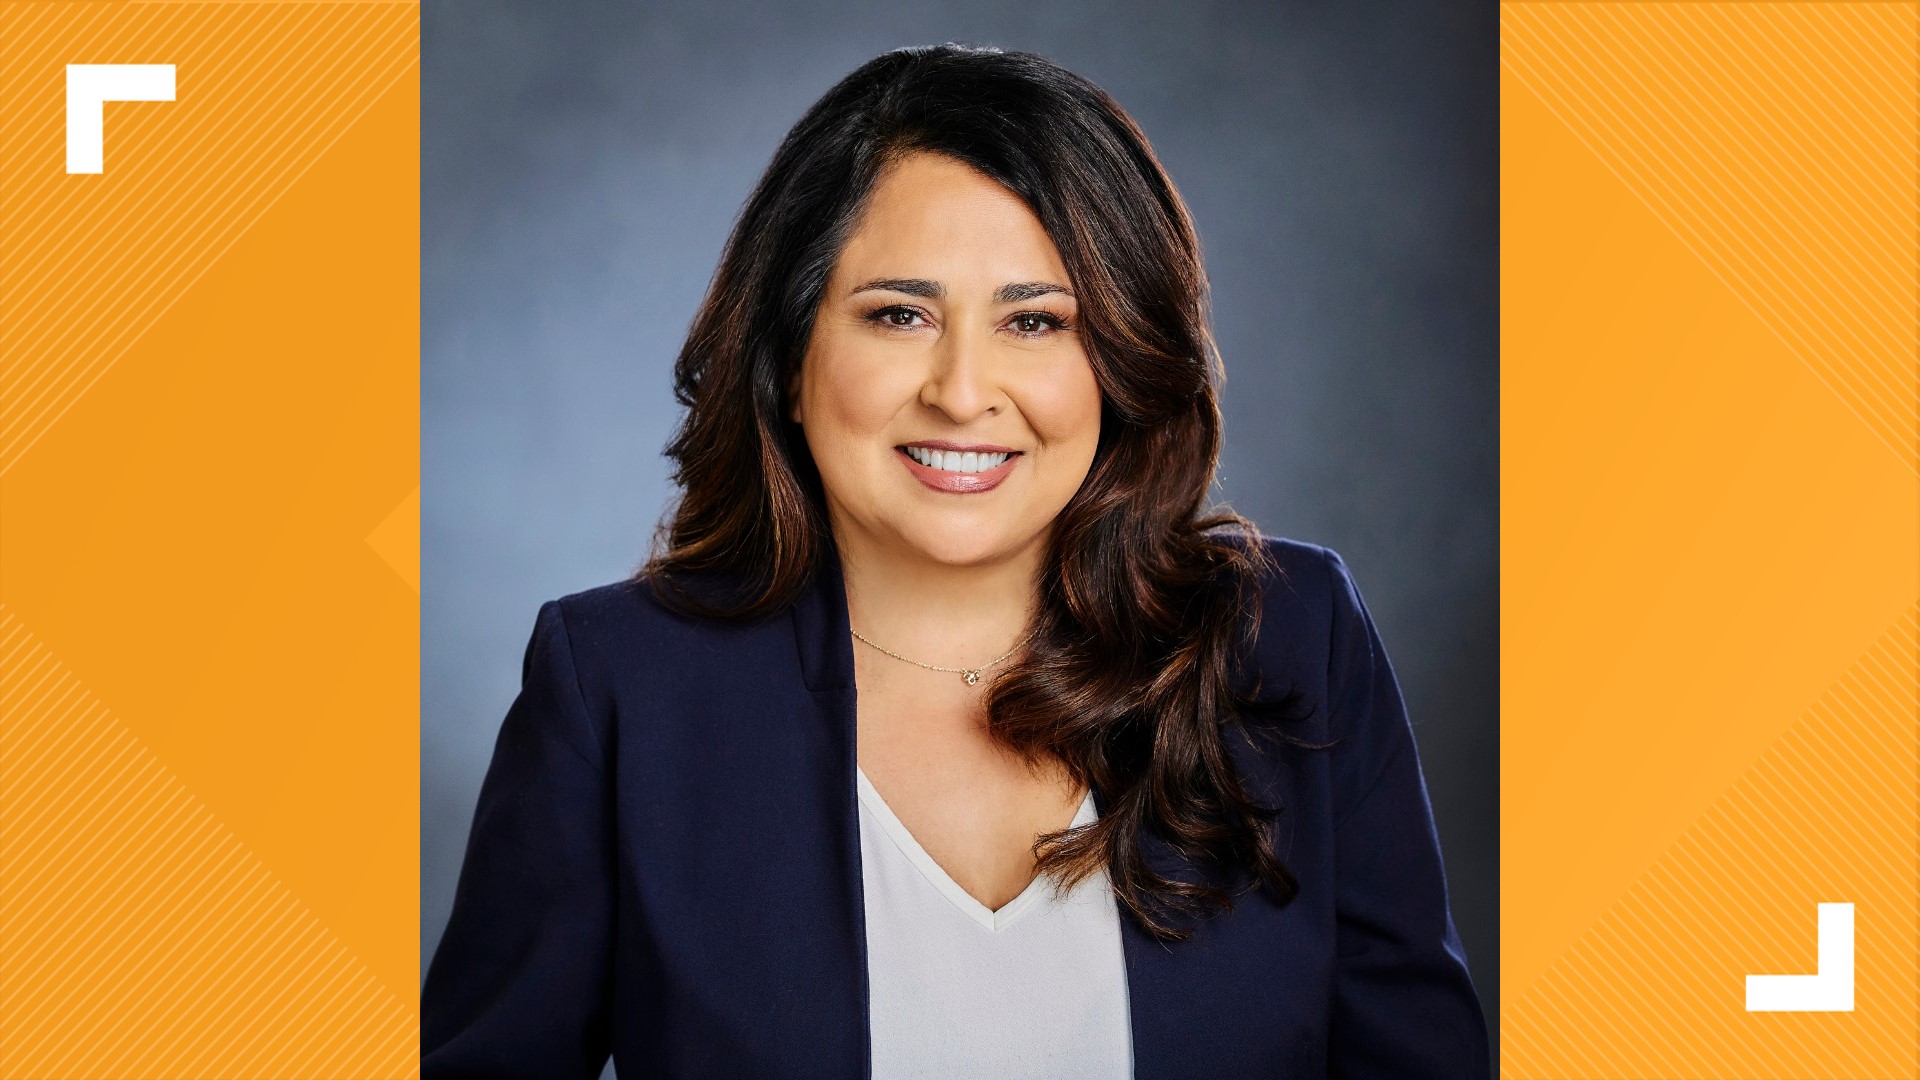 Officials said Trevino would be the first woman of color and first Latina to fill the position if confirmed.